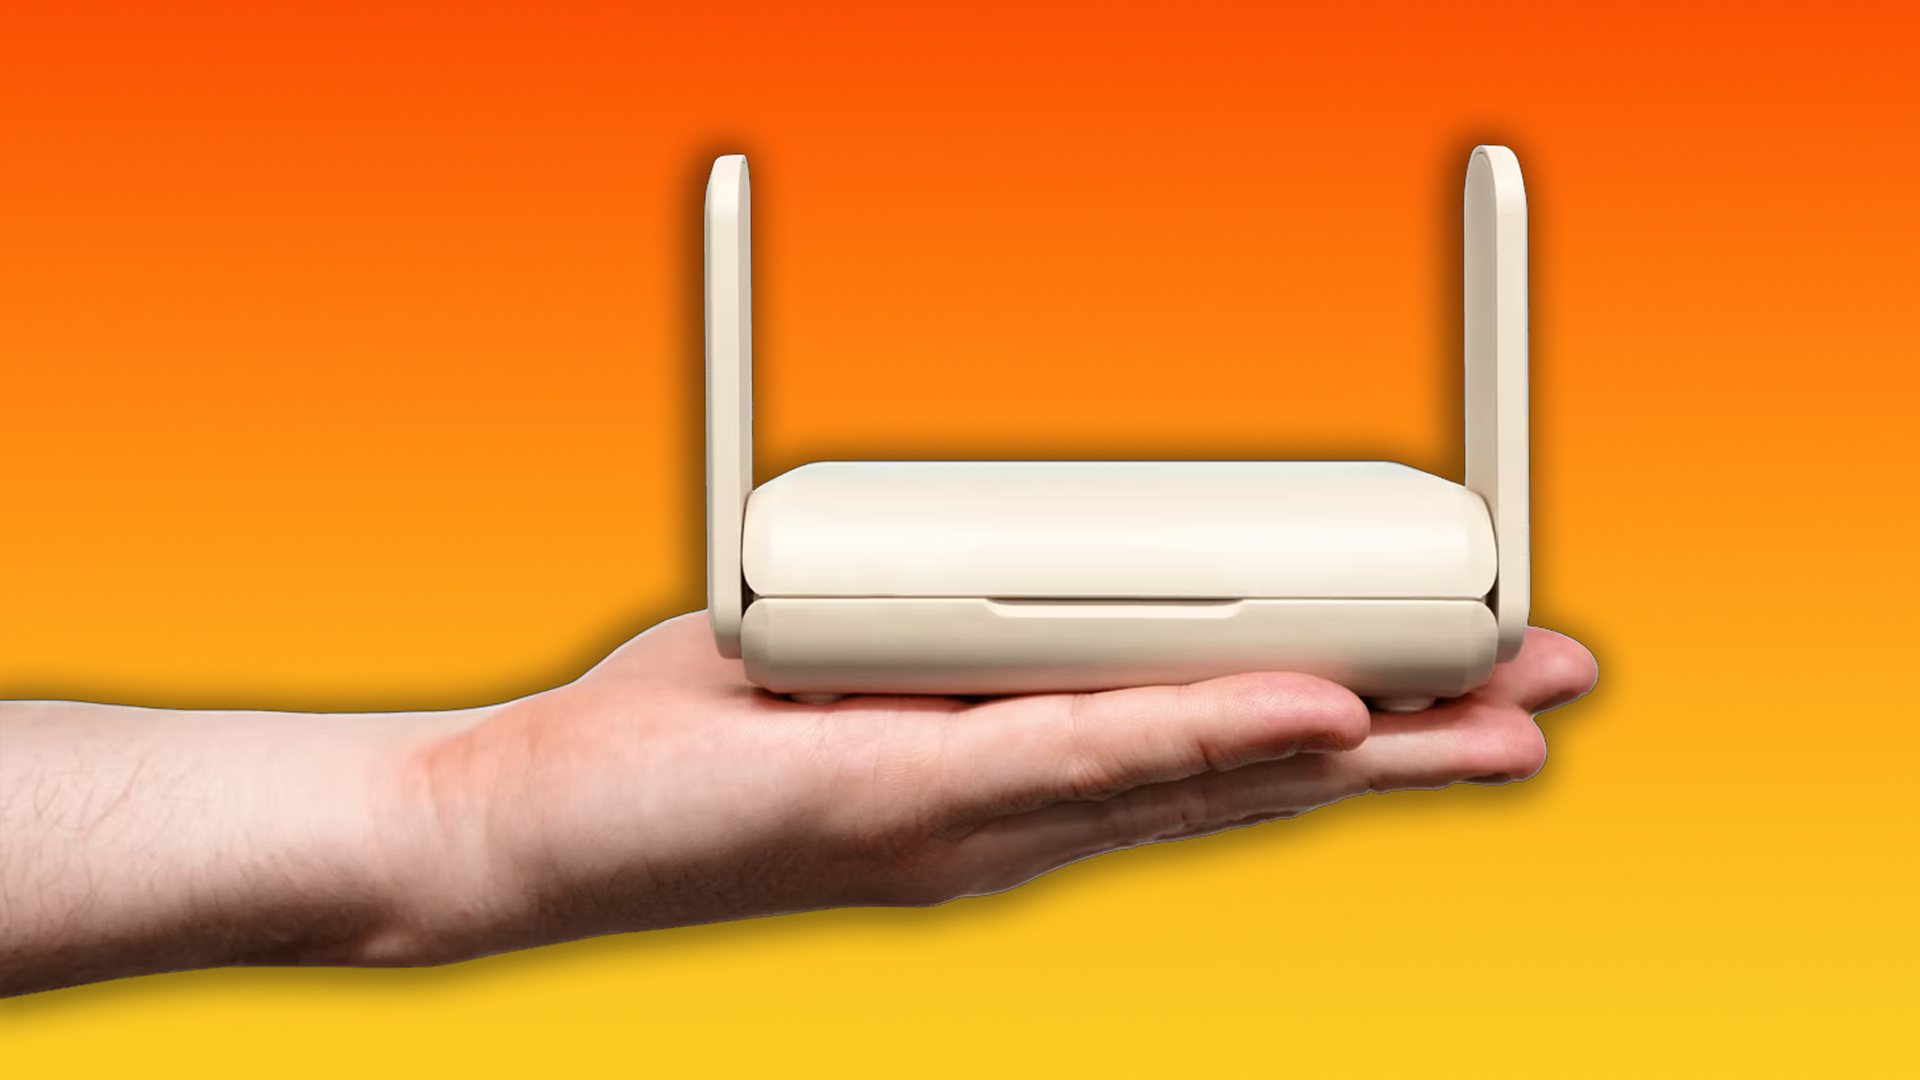 ExpressVPN launches Aircove Go router, puts protection in your palm